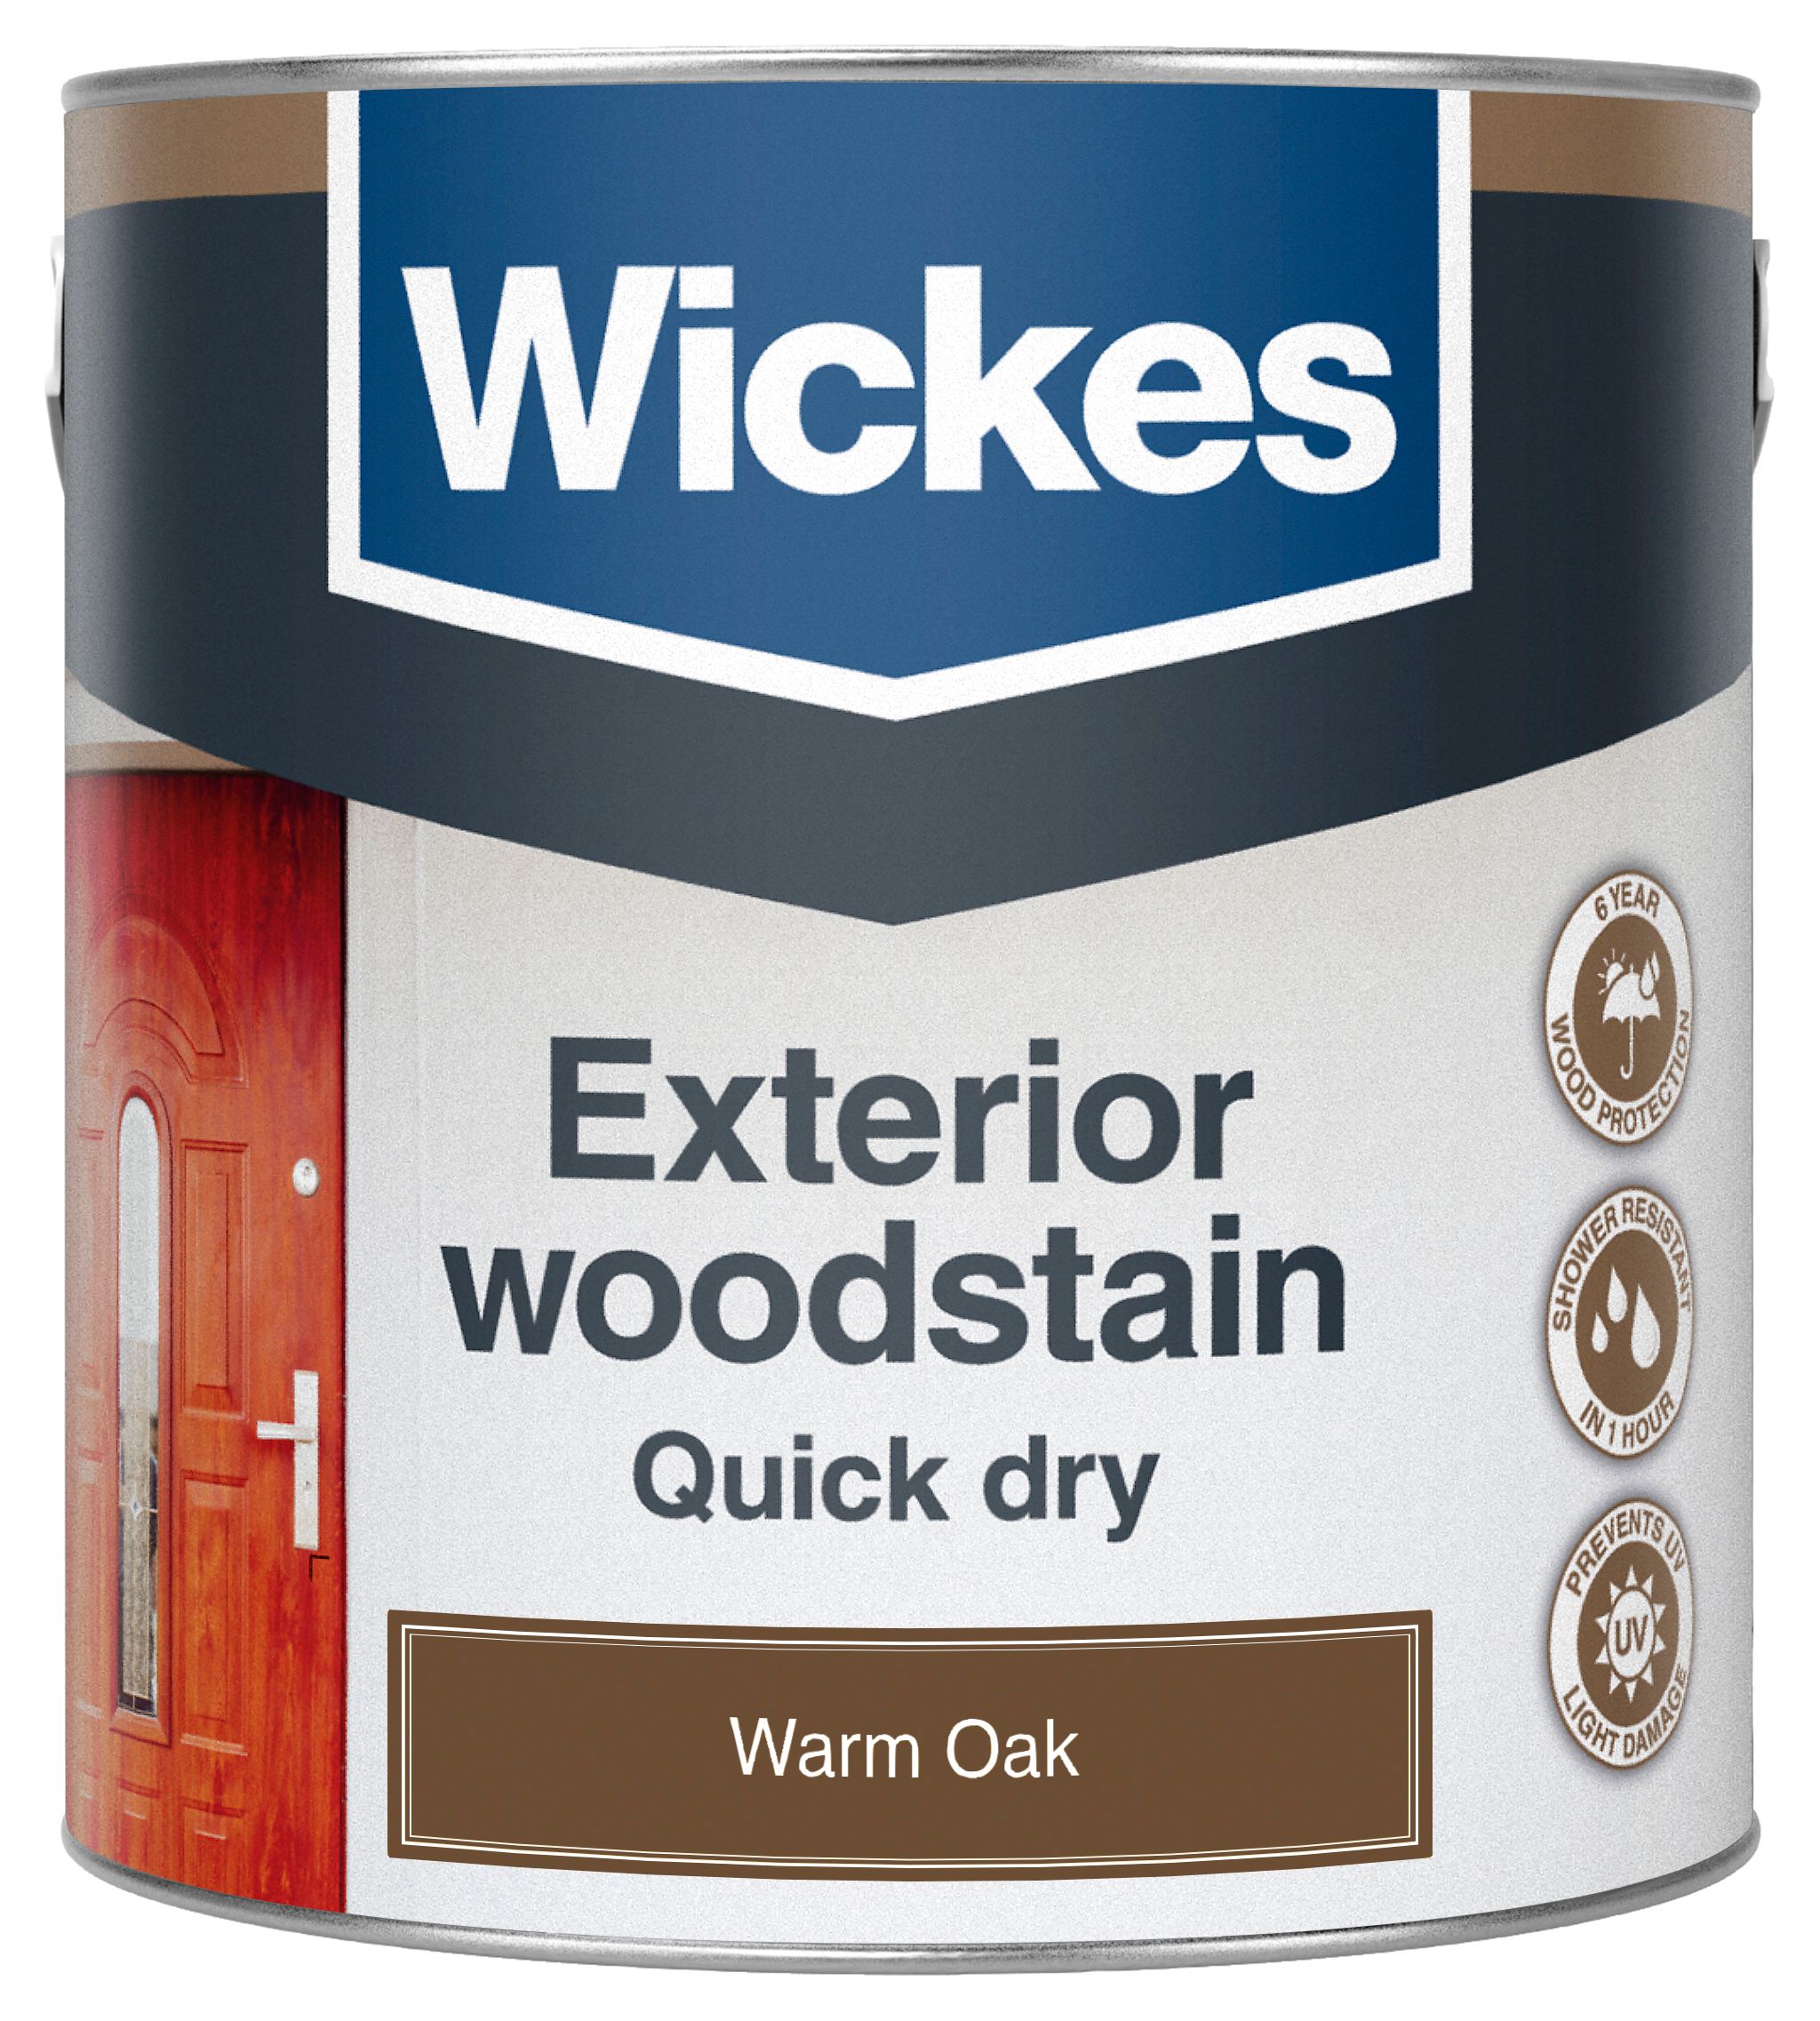 Image of Wickes Exterior Quick Dry Woodstain - Warm Oak - 2.5L